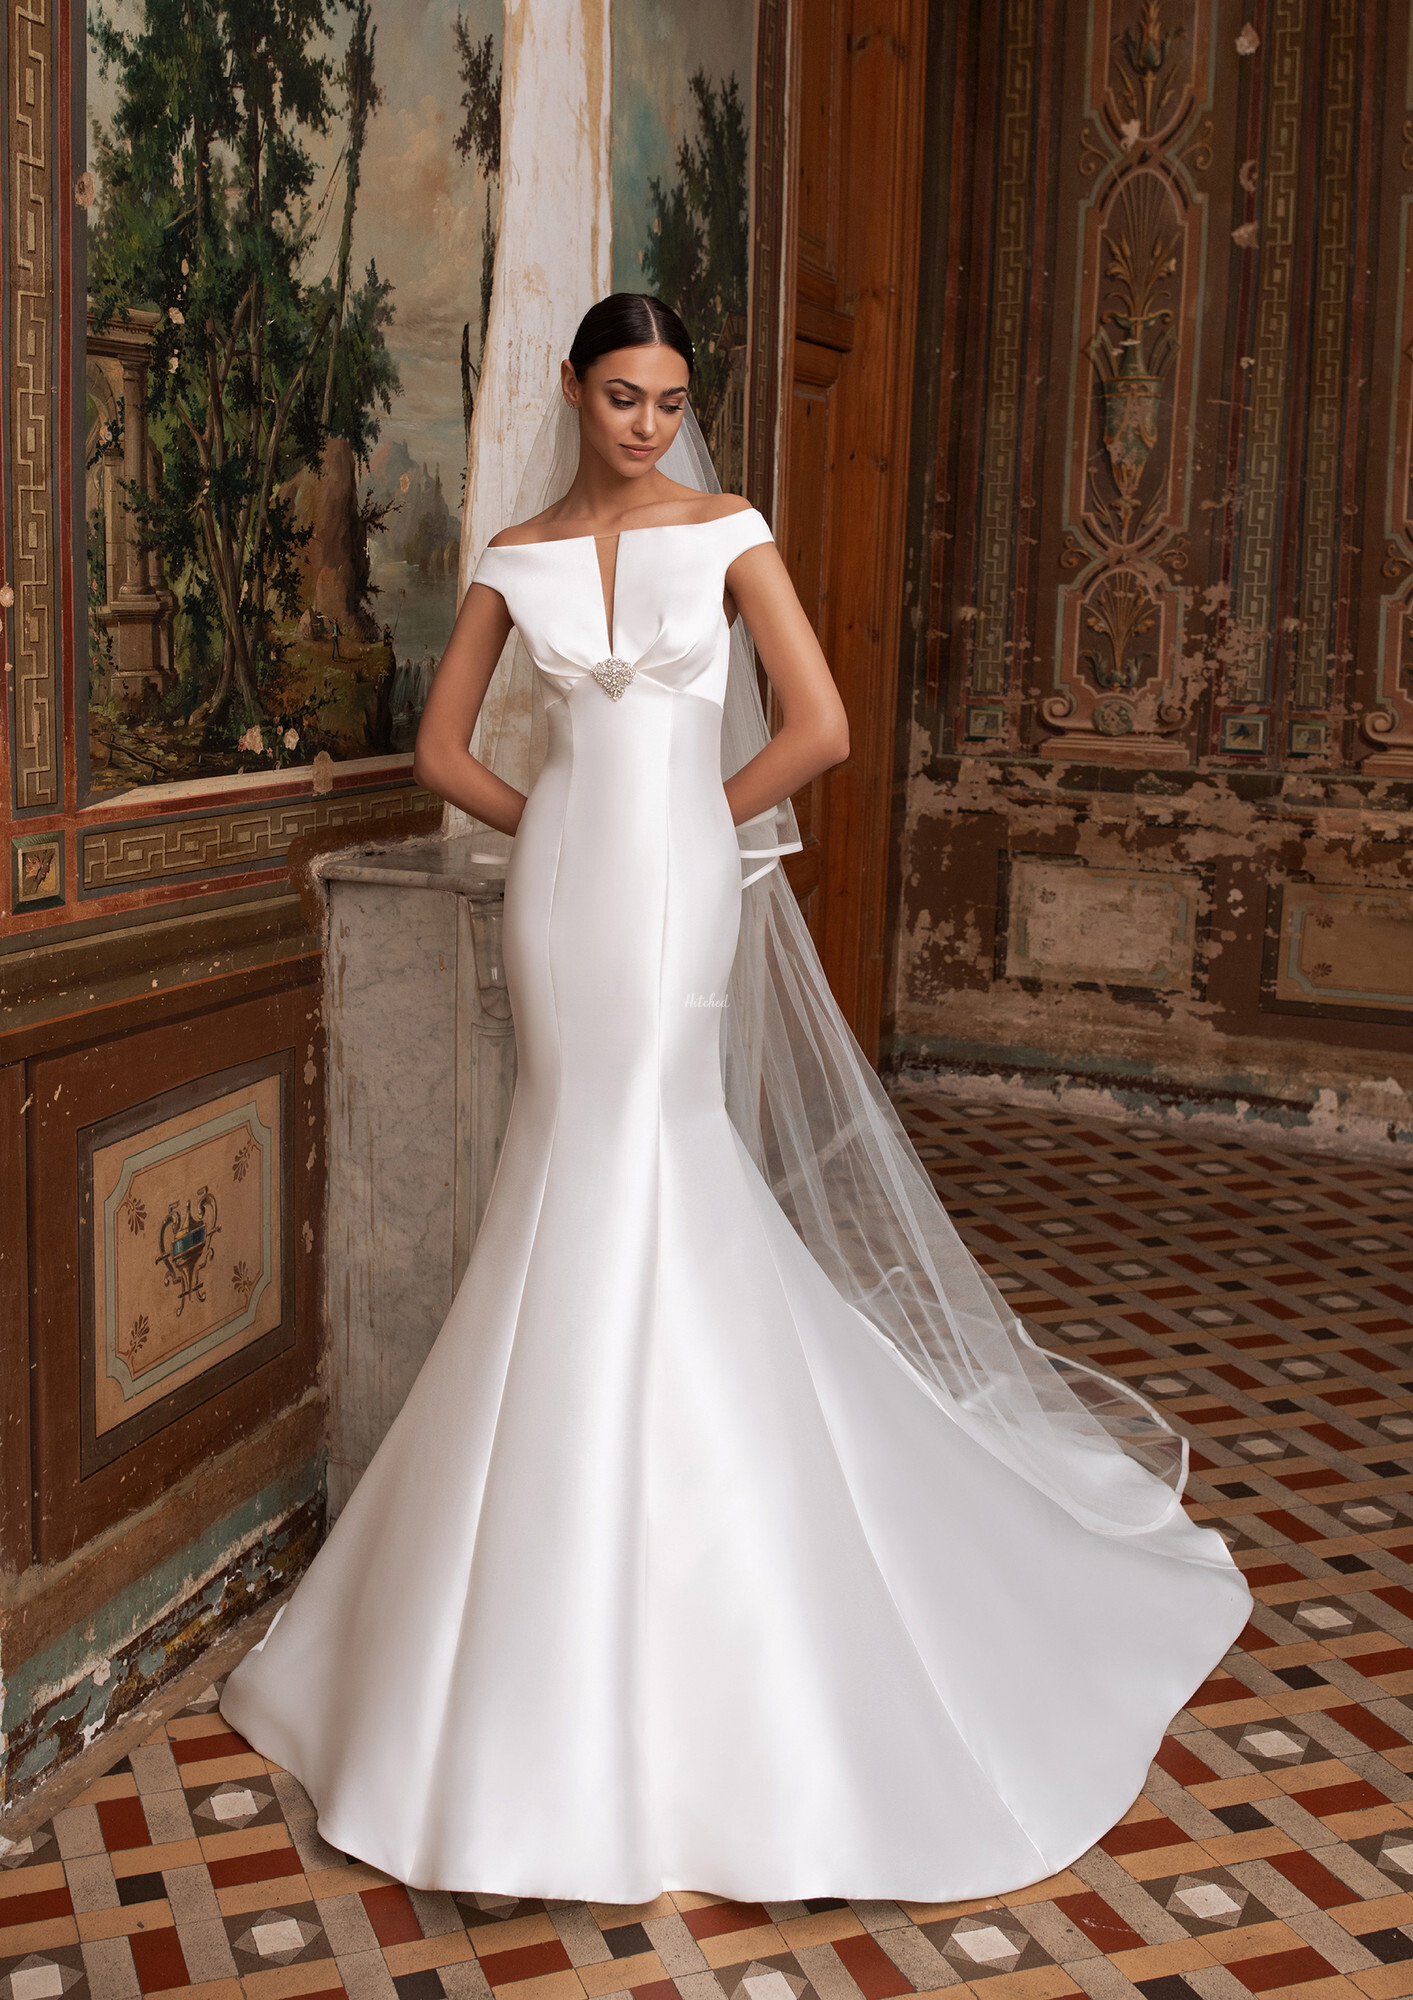 ALTAIR Wedding Dress from Pronovias - hitched.co.uk